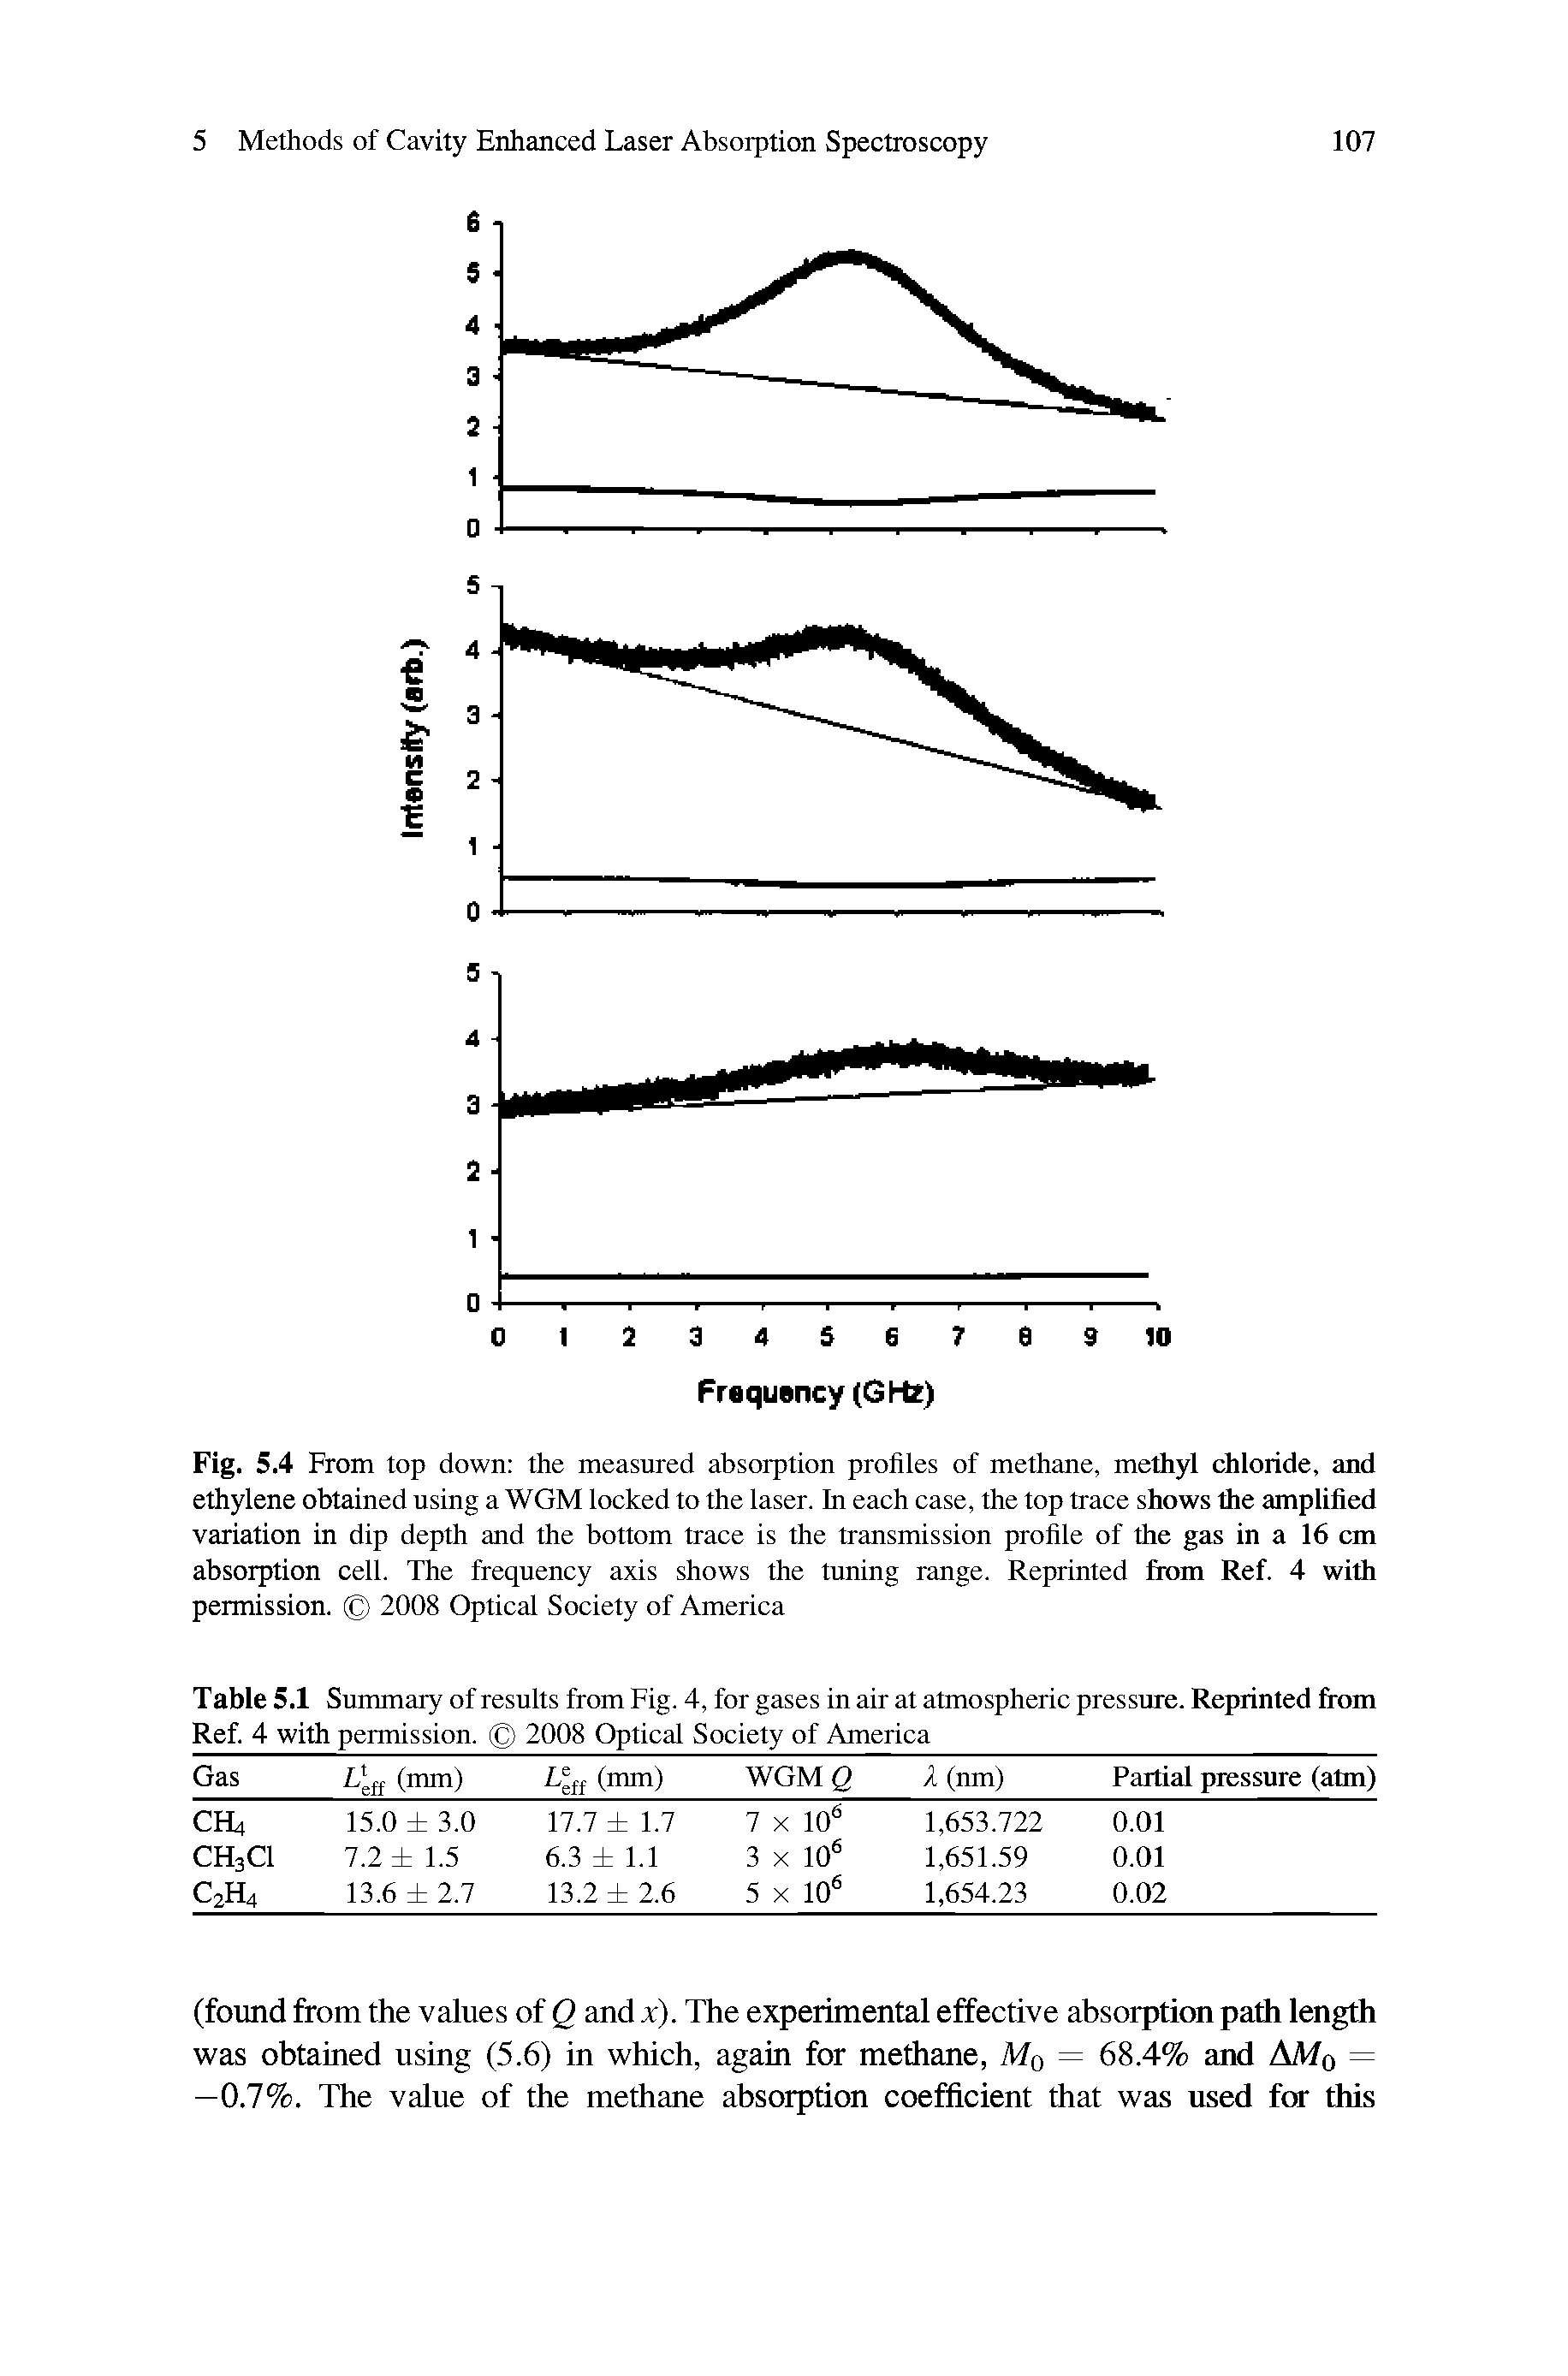 Fig. 5.4 From top down the measured absorption profiles of methane, methyl chloride, and ethylene obtained using a WGM locked to the laser. In each case, the top trace shows the amplified variation in dip depth and the bottom trace is the transmission profile of the gas in a 16 cm absorption cell. The frequency axis shows the tuning range. Reprinted from Ref. 4 with permission. 2008 Optical Society of America...